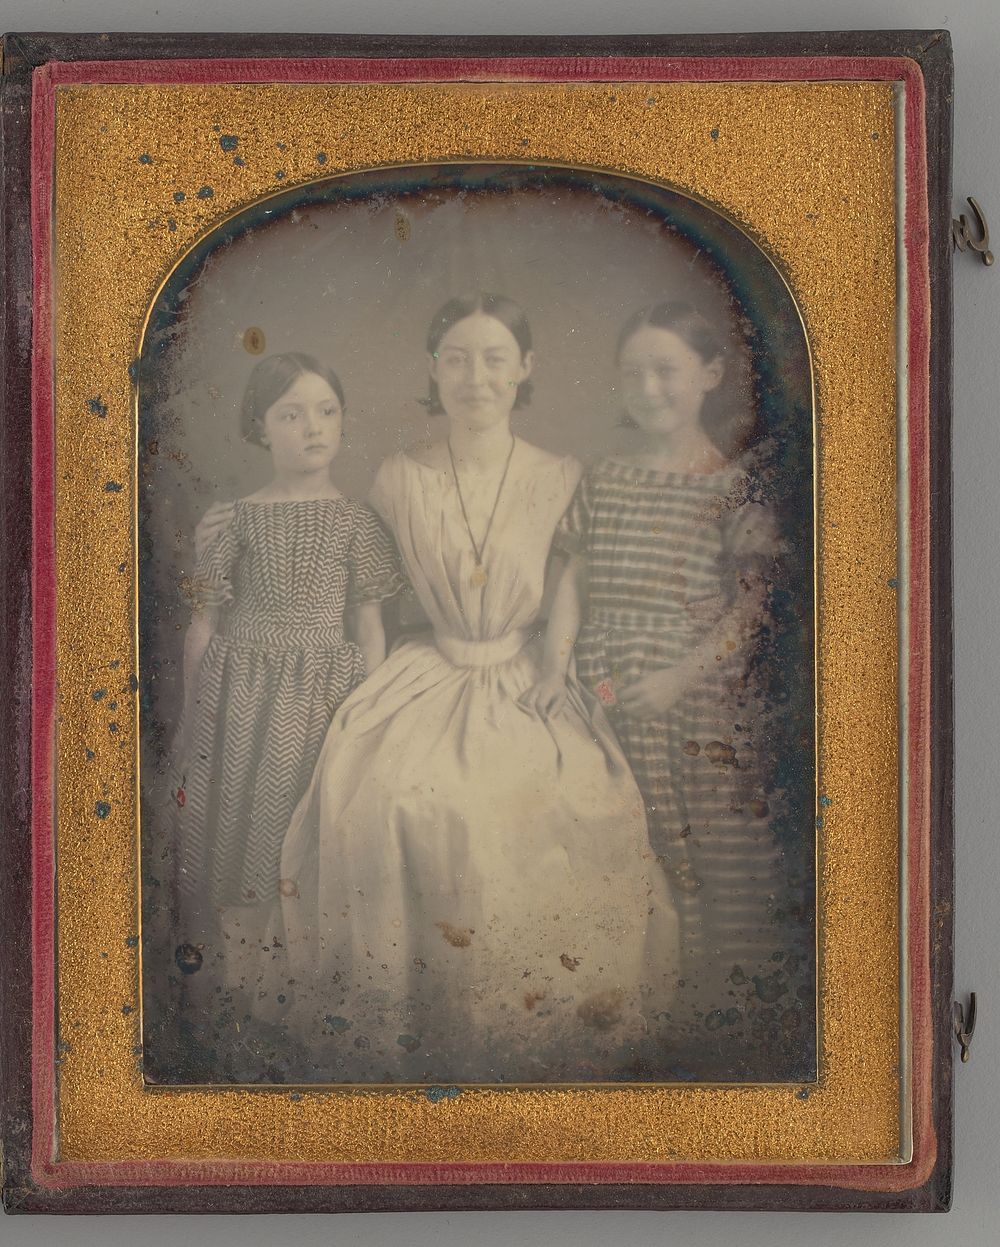 Untitled (Portrait of a Woman with Two Girls) by Unknown Maker